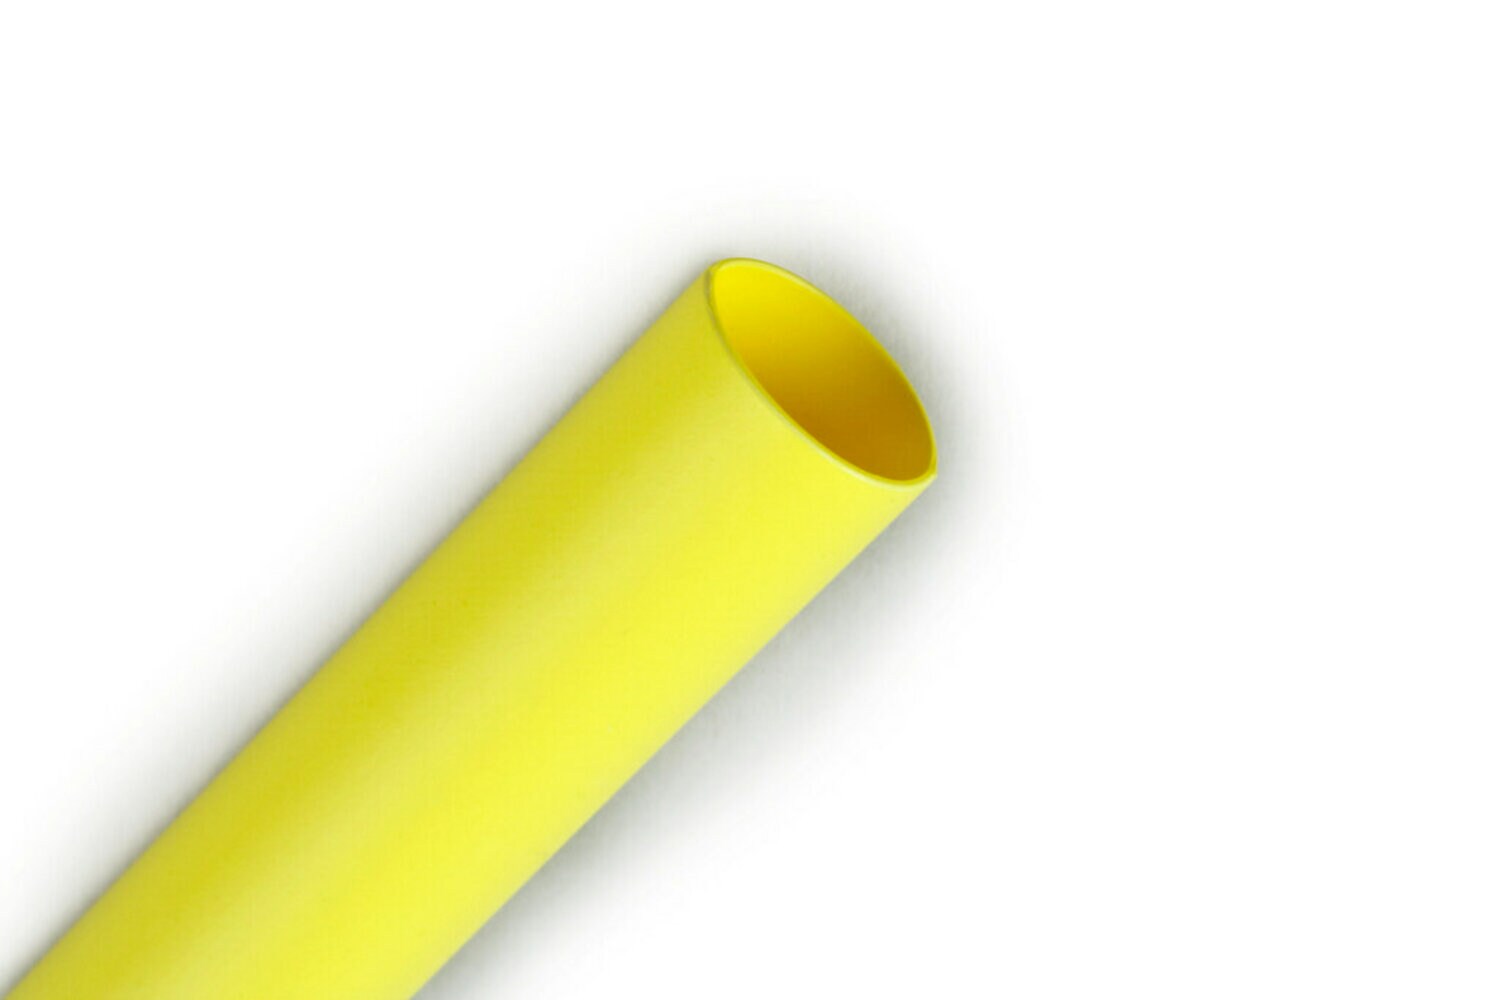 7100100361 - 3M Heat Shrink Thin-Wall Tubing FP-301-3/8-Yellow-200`: 200 ft spool
length, 200 ft/case